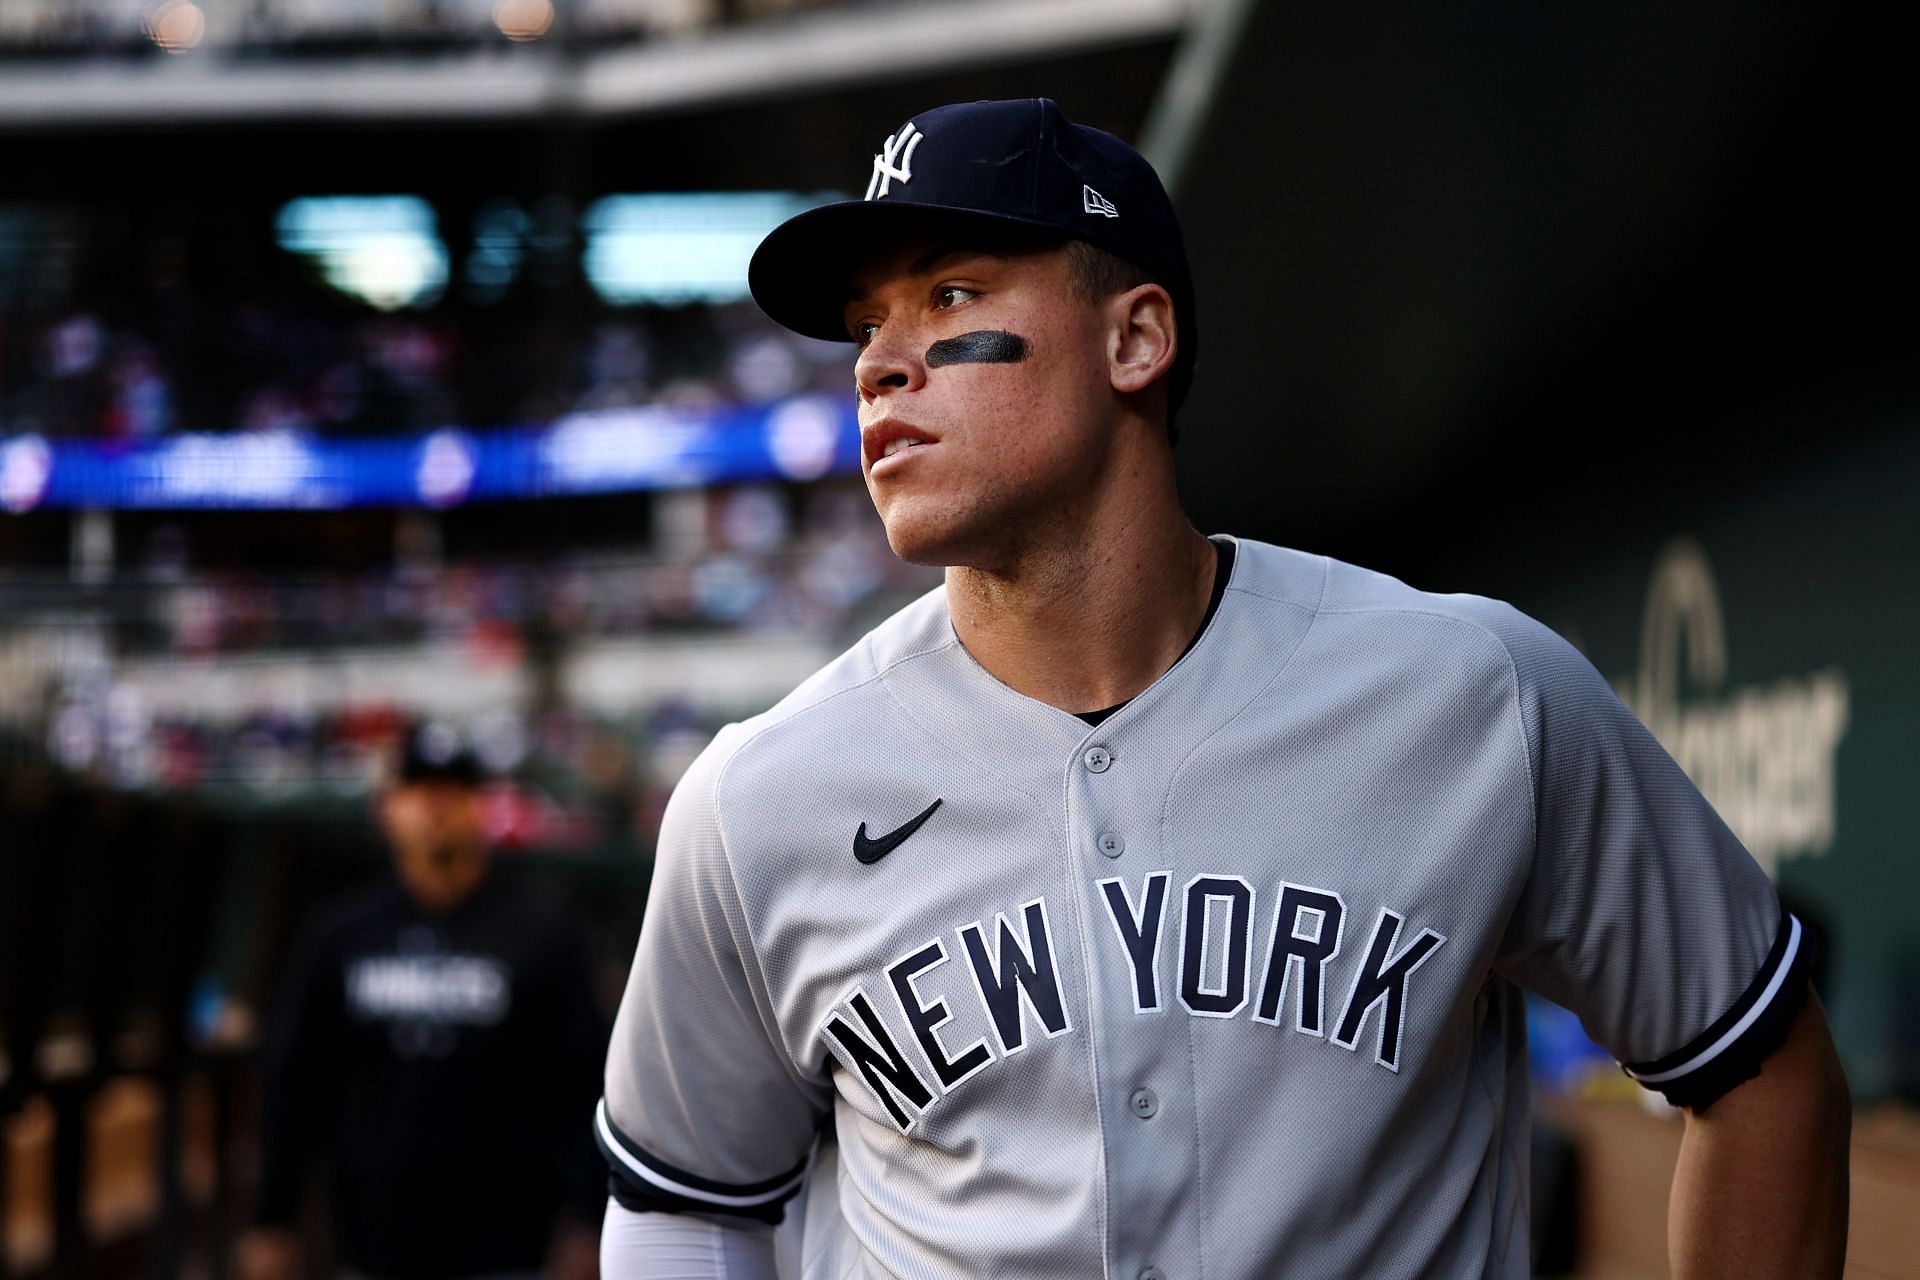 Aaron Judge removed from game with oblique injury